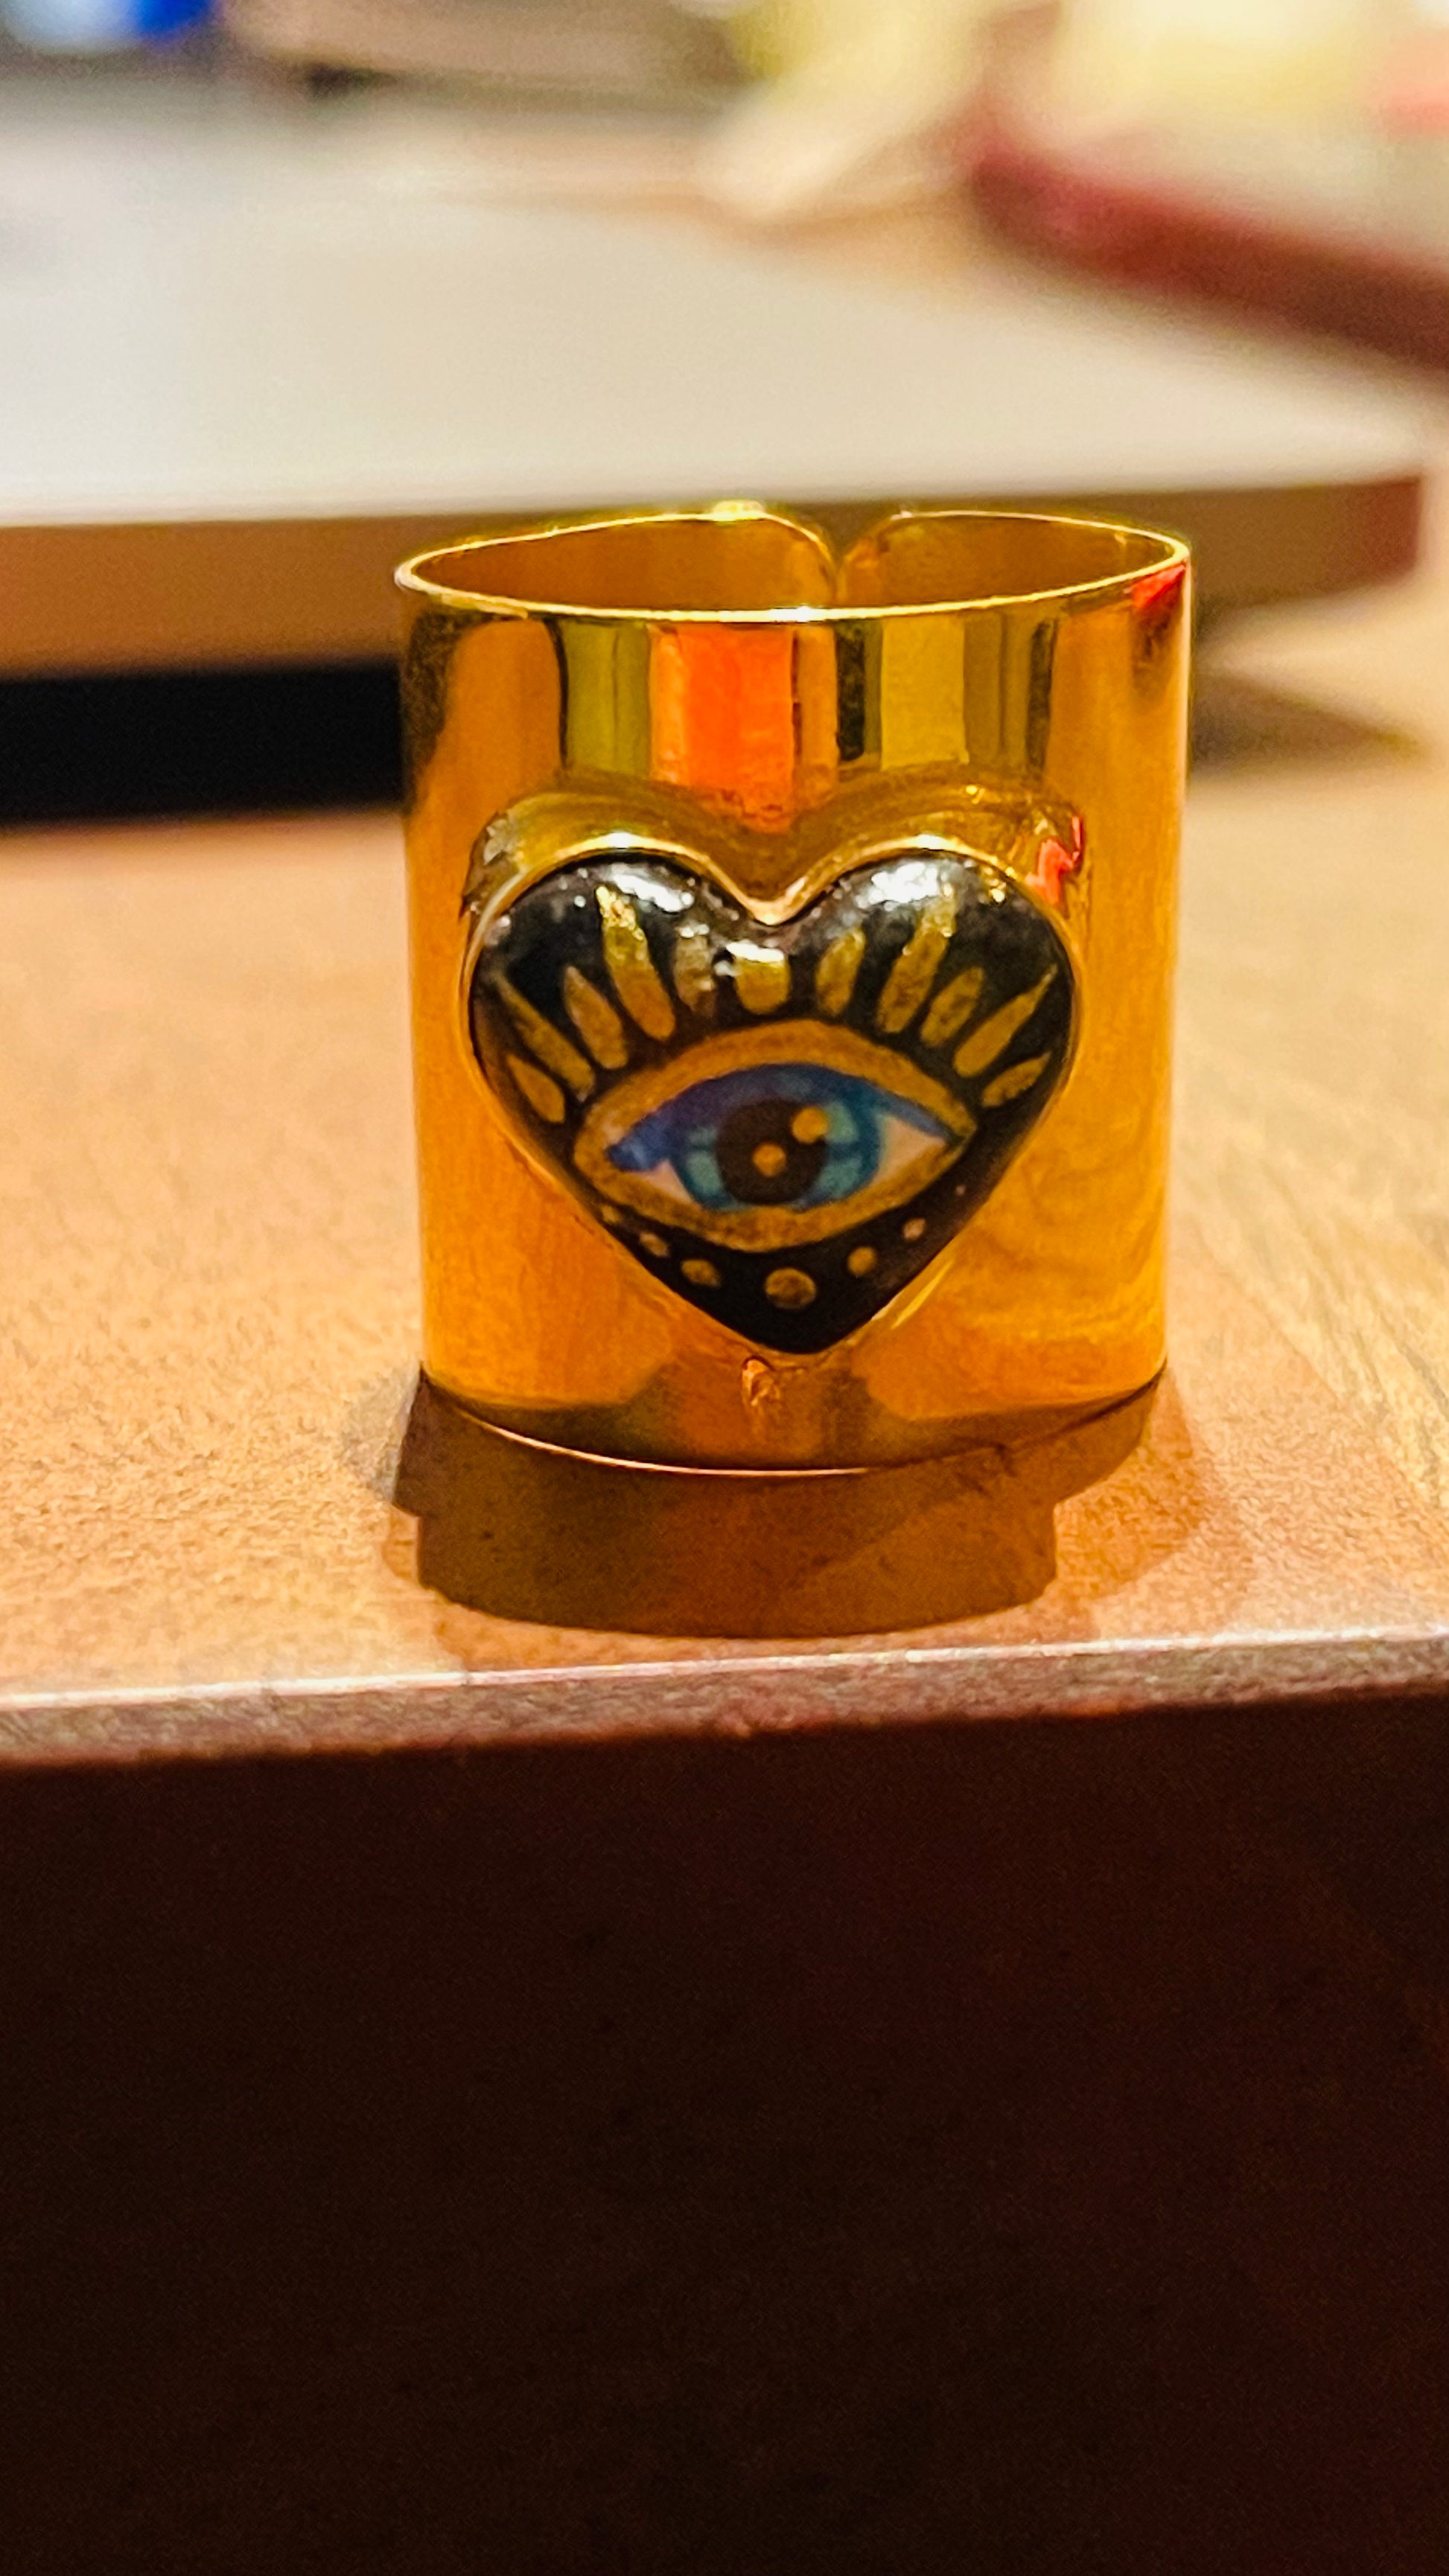 Hand-painted cultural fashion gold ring in the shape of a black heart. In the middle is painted an eye, and it is on a wooden table.